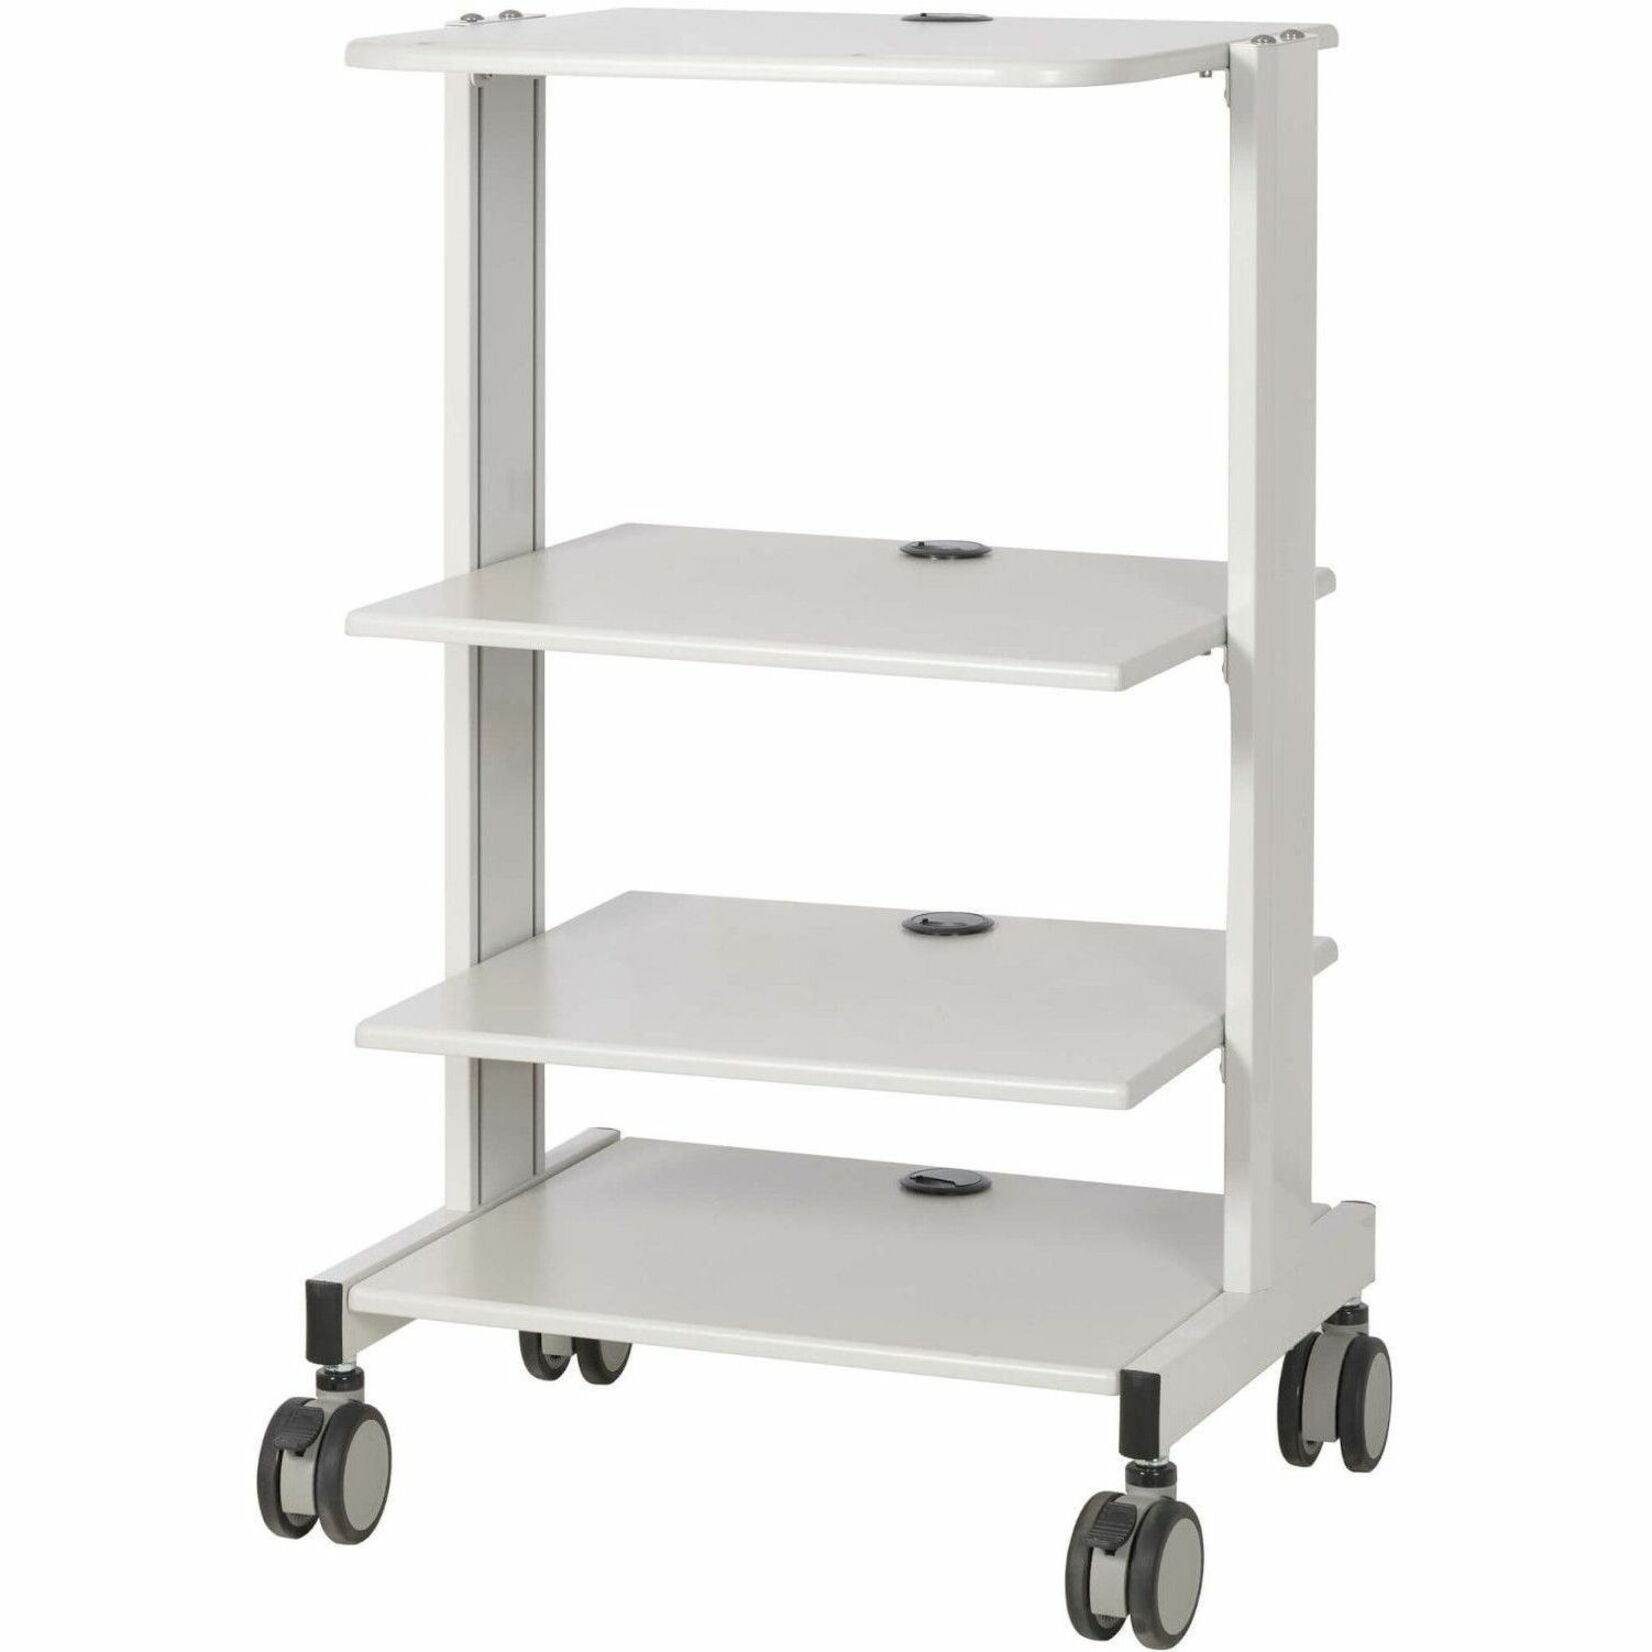 Tripp Lite WWSSRSTAA Mobile Workstation with Adjustable Shelves, Locking Casters, TAA Compliant